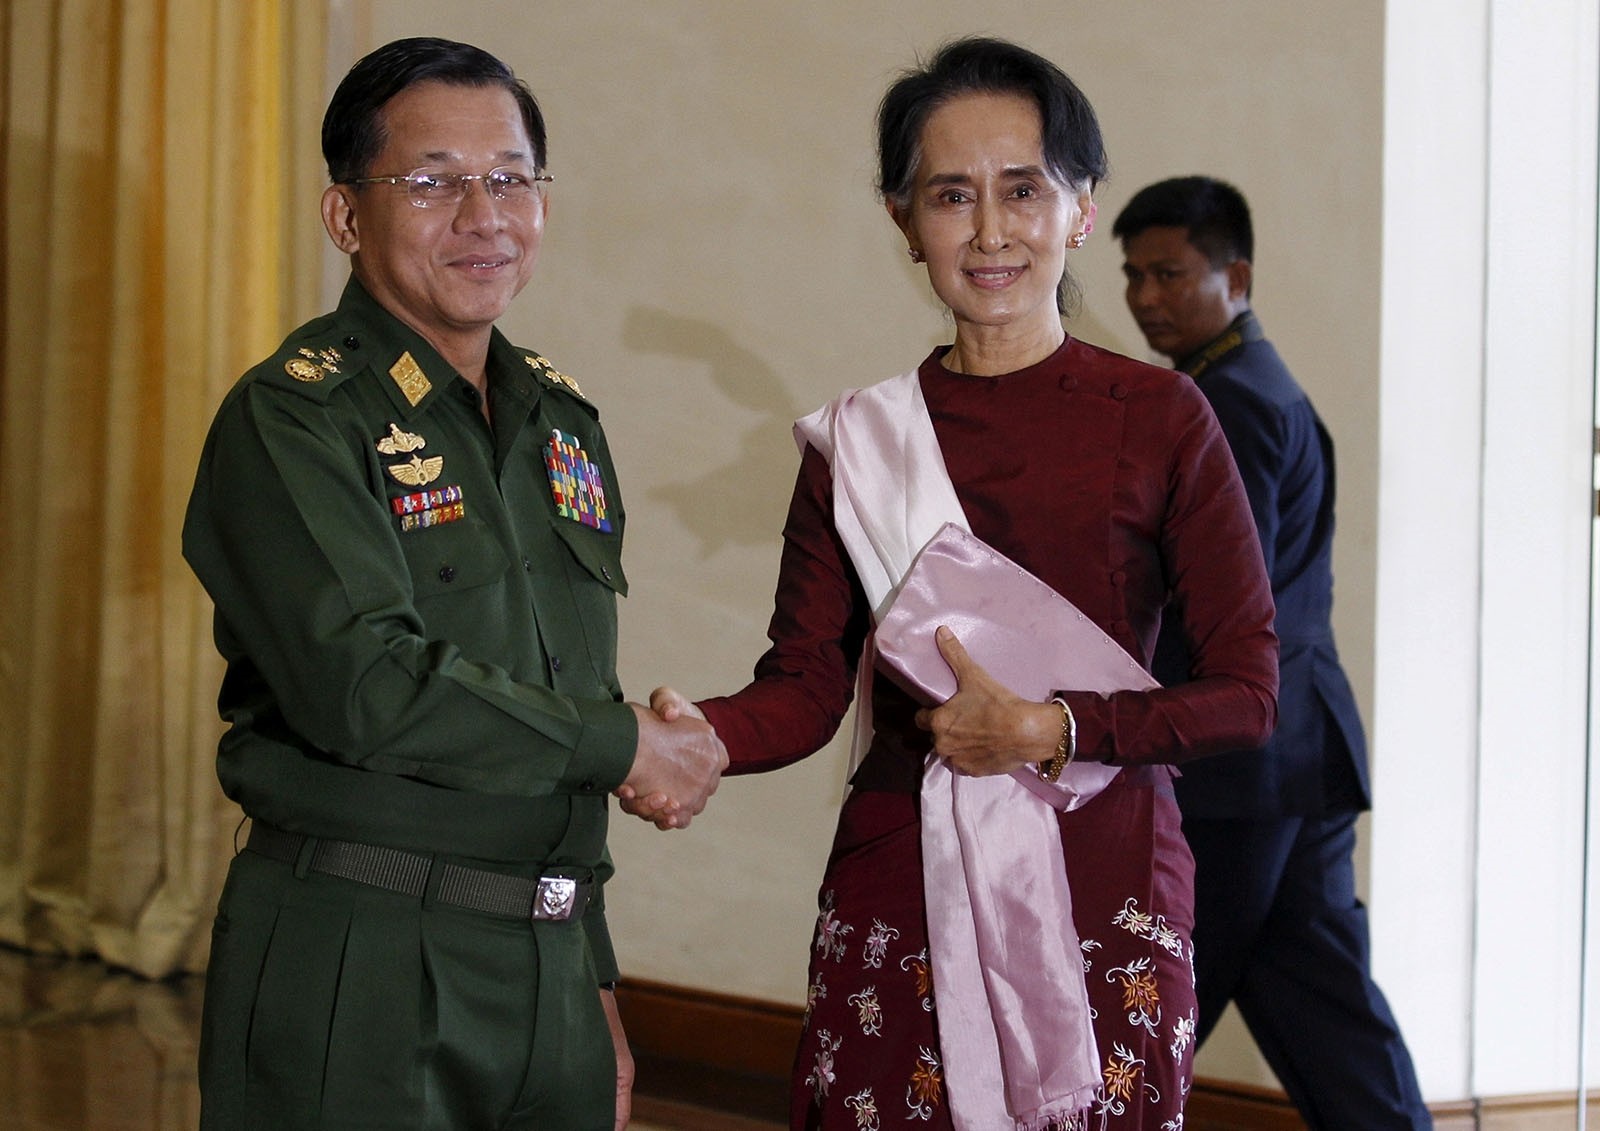 Senior General Min Aung Hlaing (L), Myanmar's commander-in-chief, shakes hands with National League for Democracy (NLD) party leader Aung San Suu Kyi before their meeting in Hlaing's office at Naypyitaw December 2, 2015.